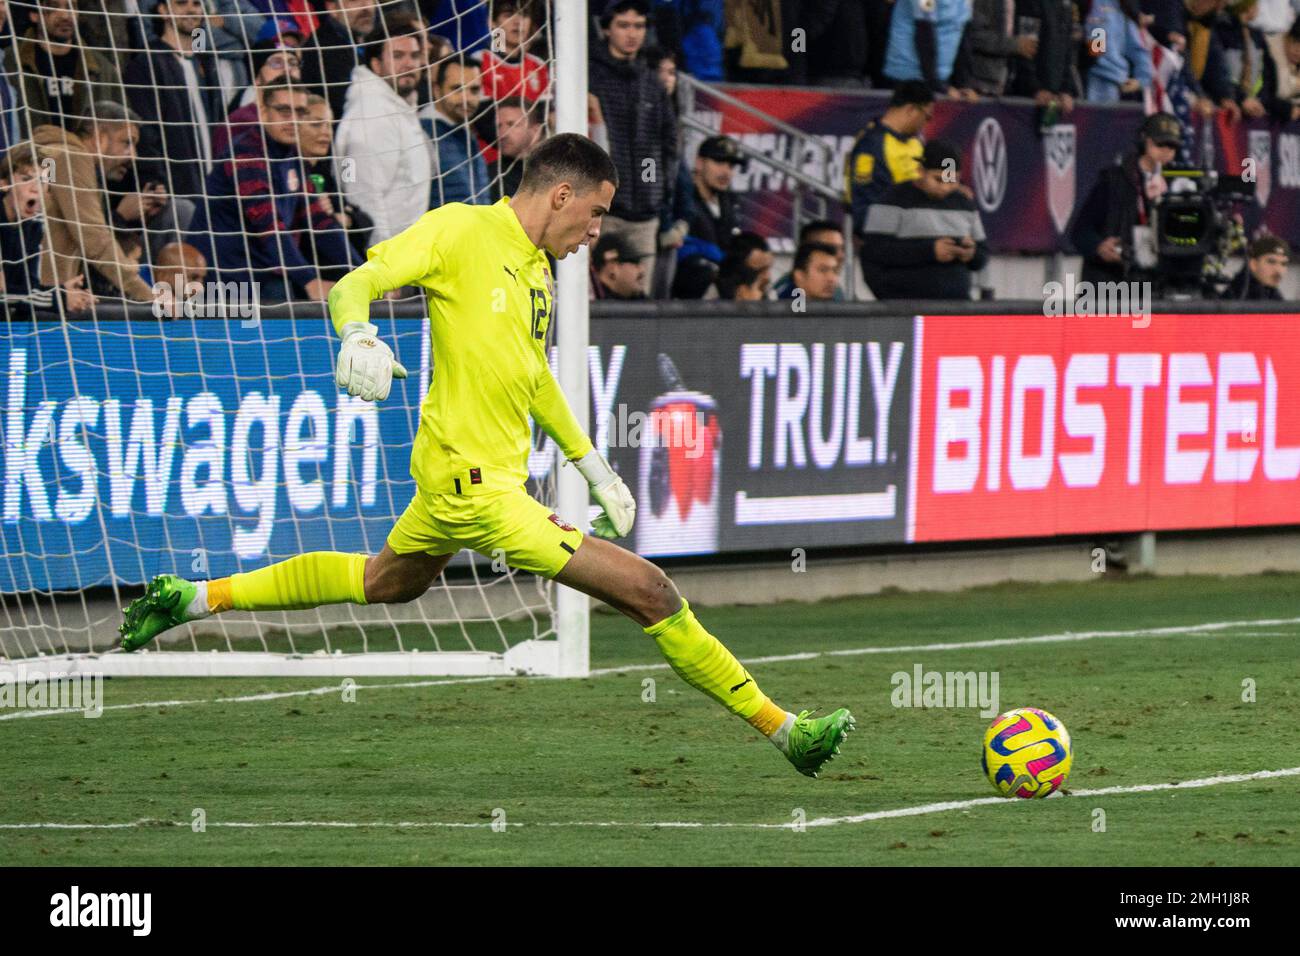 Serbia goalkeeper Dragan Rosić (12) during an international friendly match against the United States of America, Wednesday, January 25, 2023, at BMO S Stock Photo